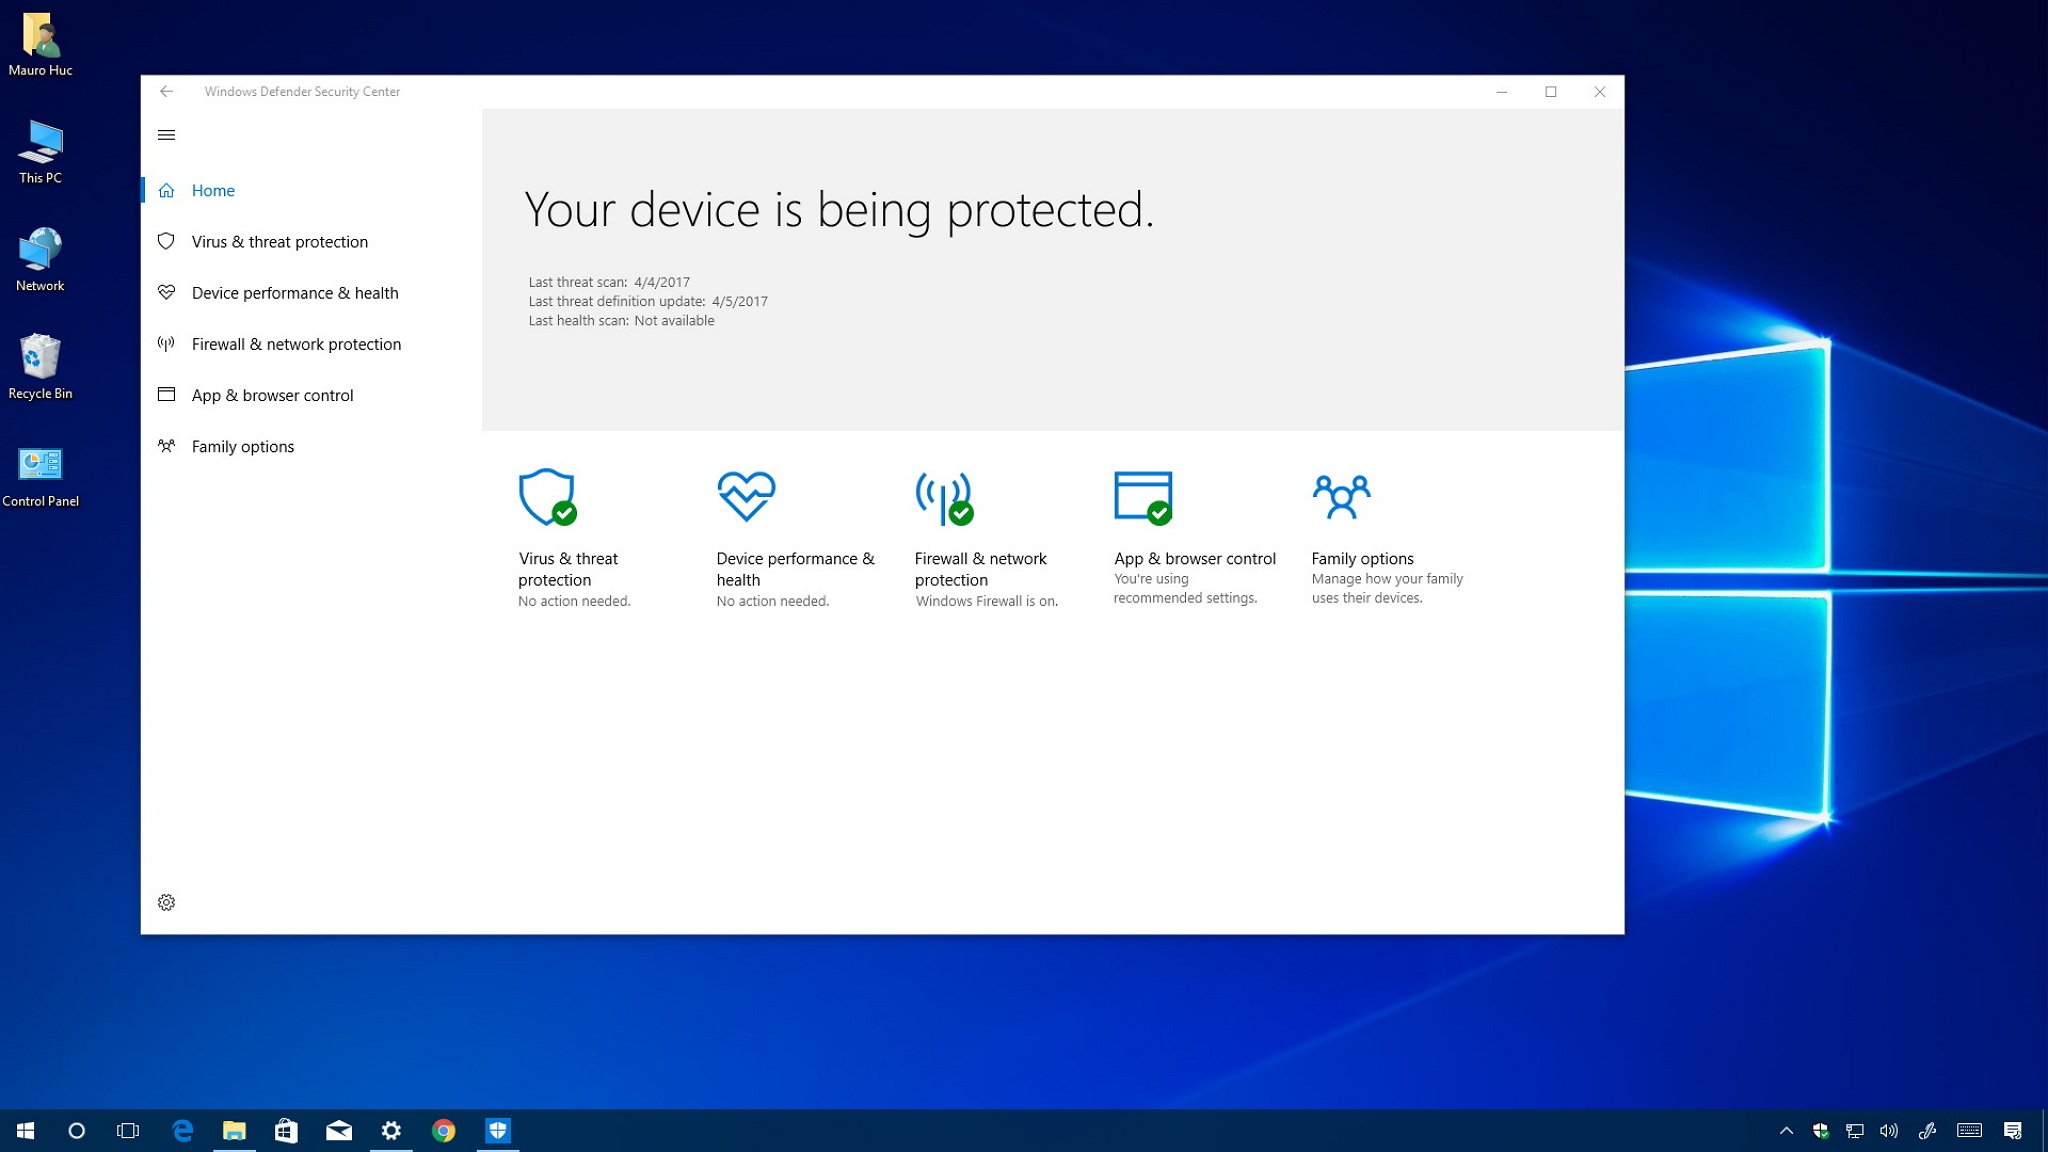 Windows Defender Security Center: What It Is And How To Use It